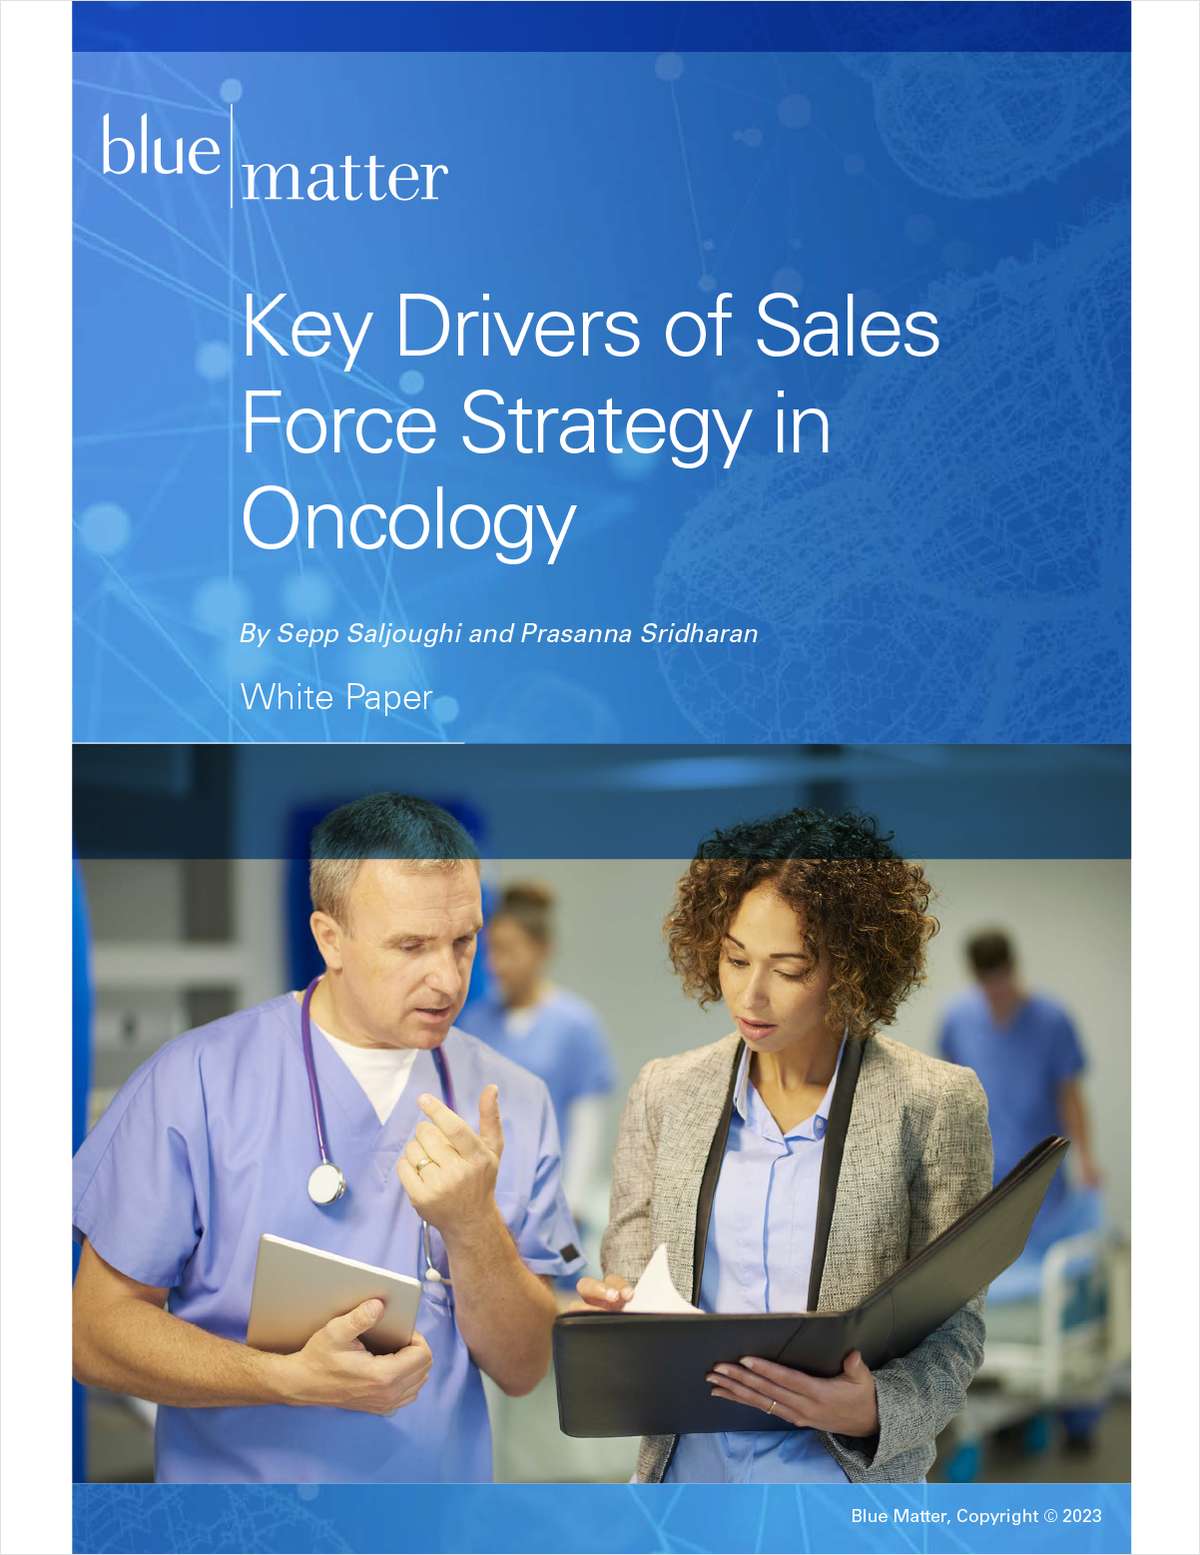 Key Drivers of Sales Force Strategy in Oncology